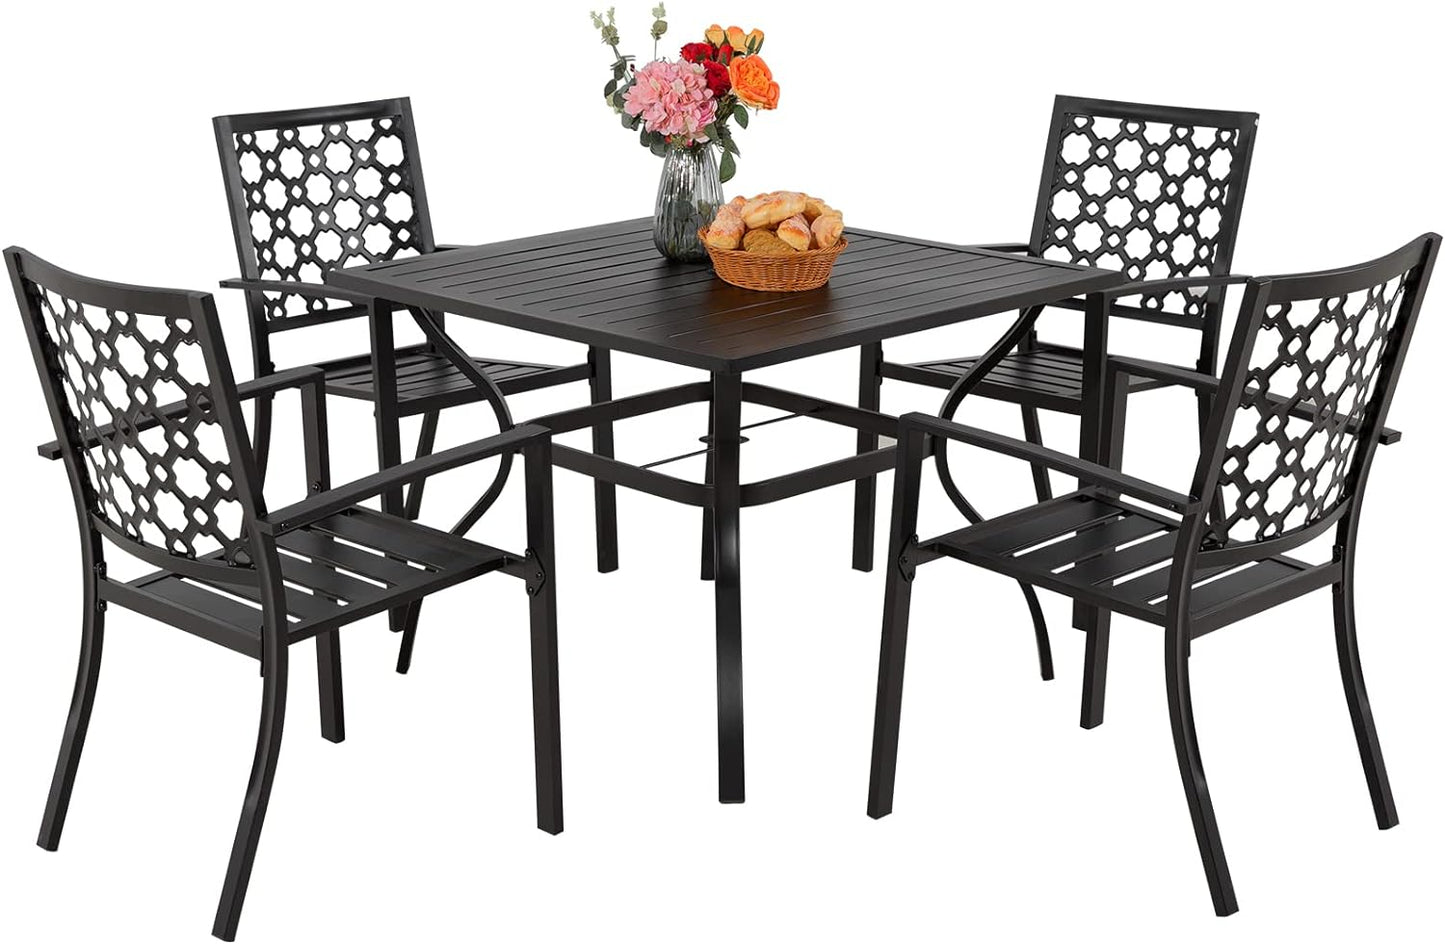 5-Piece Patio Dining Set, 4 Stackable Chairs & Square Table (1.57" Umbrella Hole)